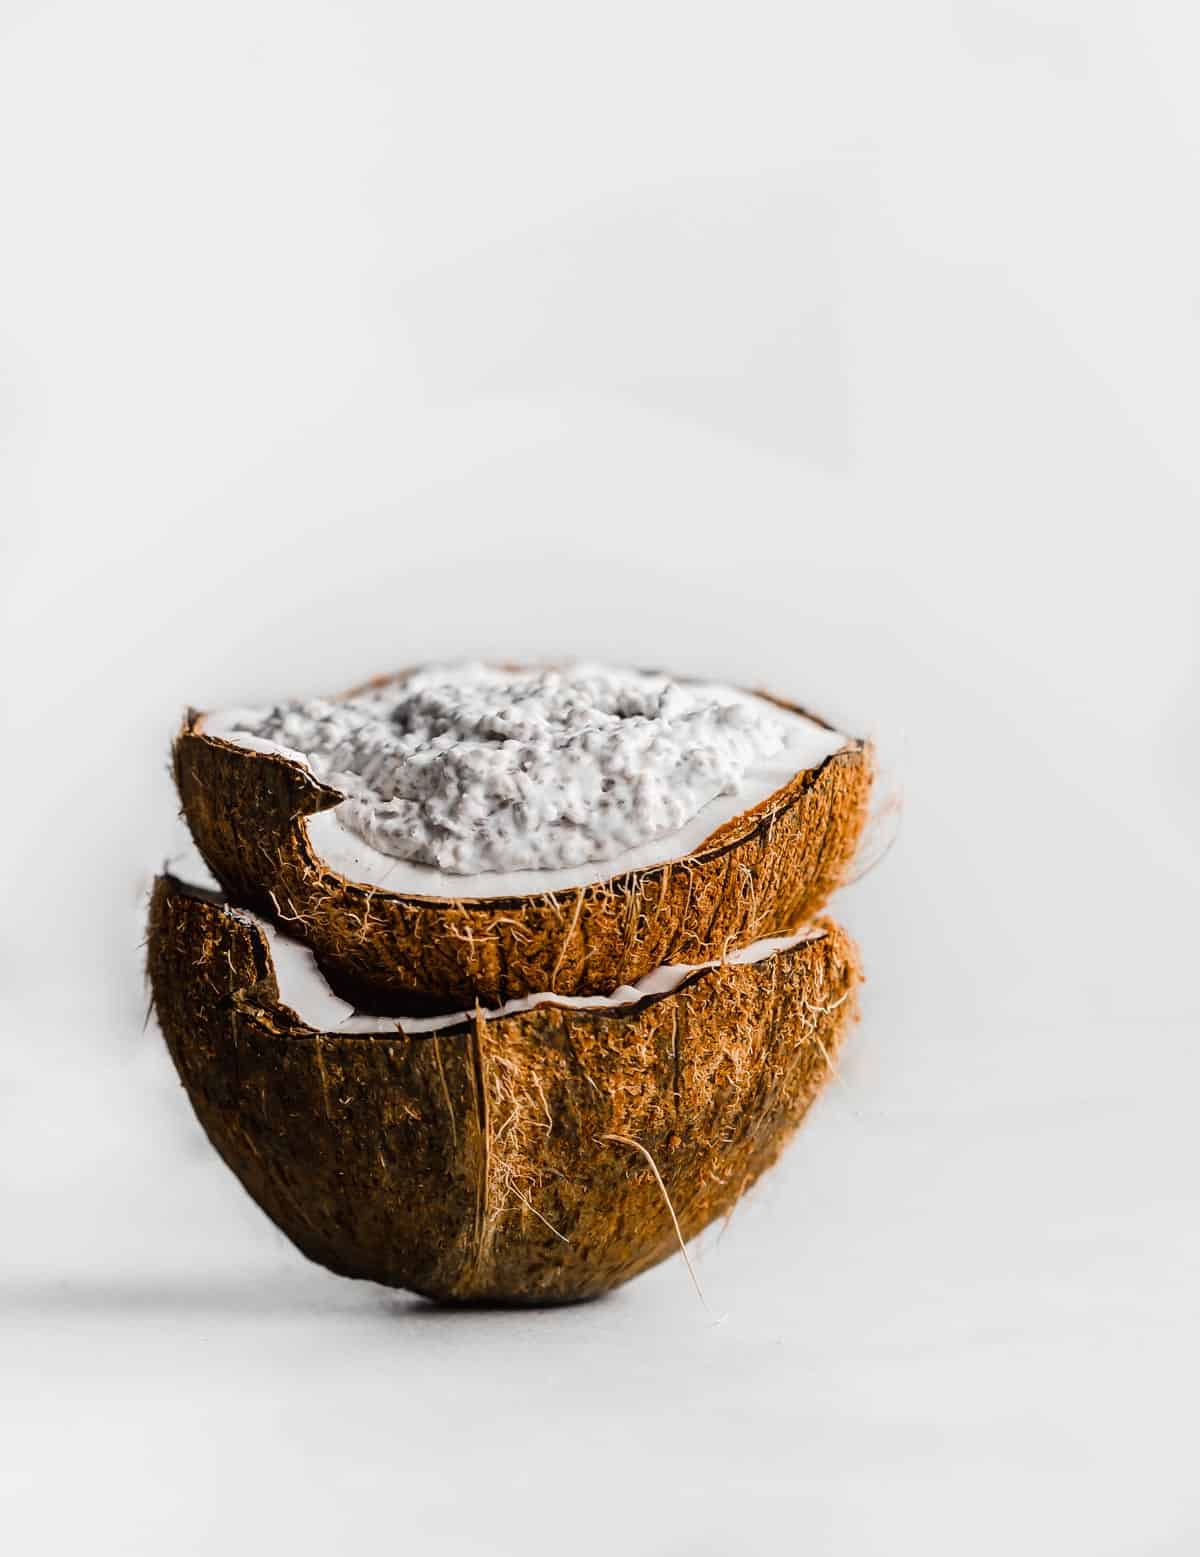 A raw coconut filled with Overnight Coconut Chia Pudding against a white background.